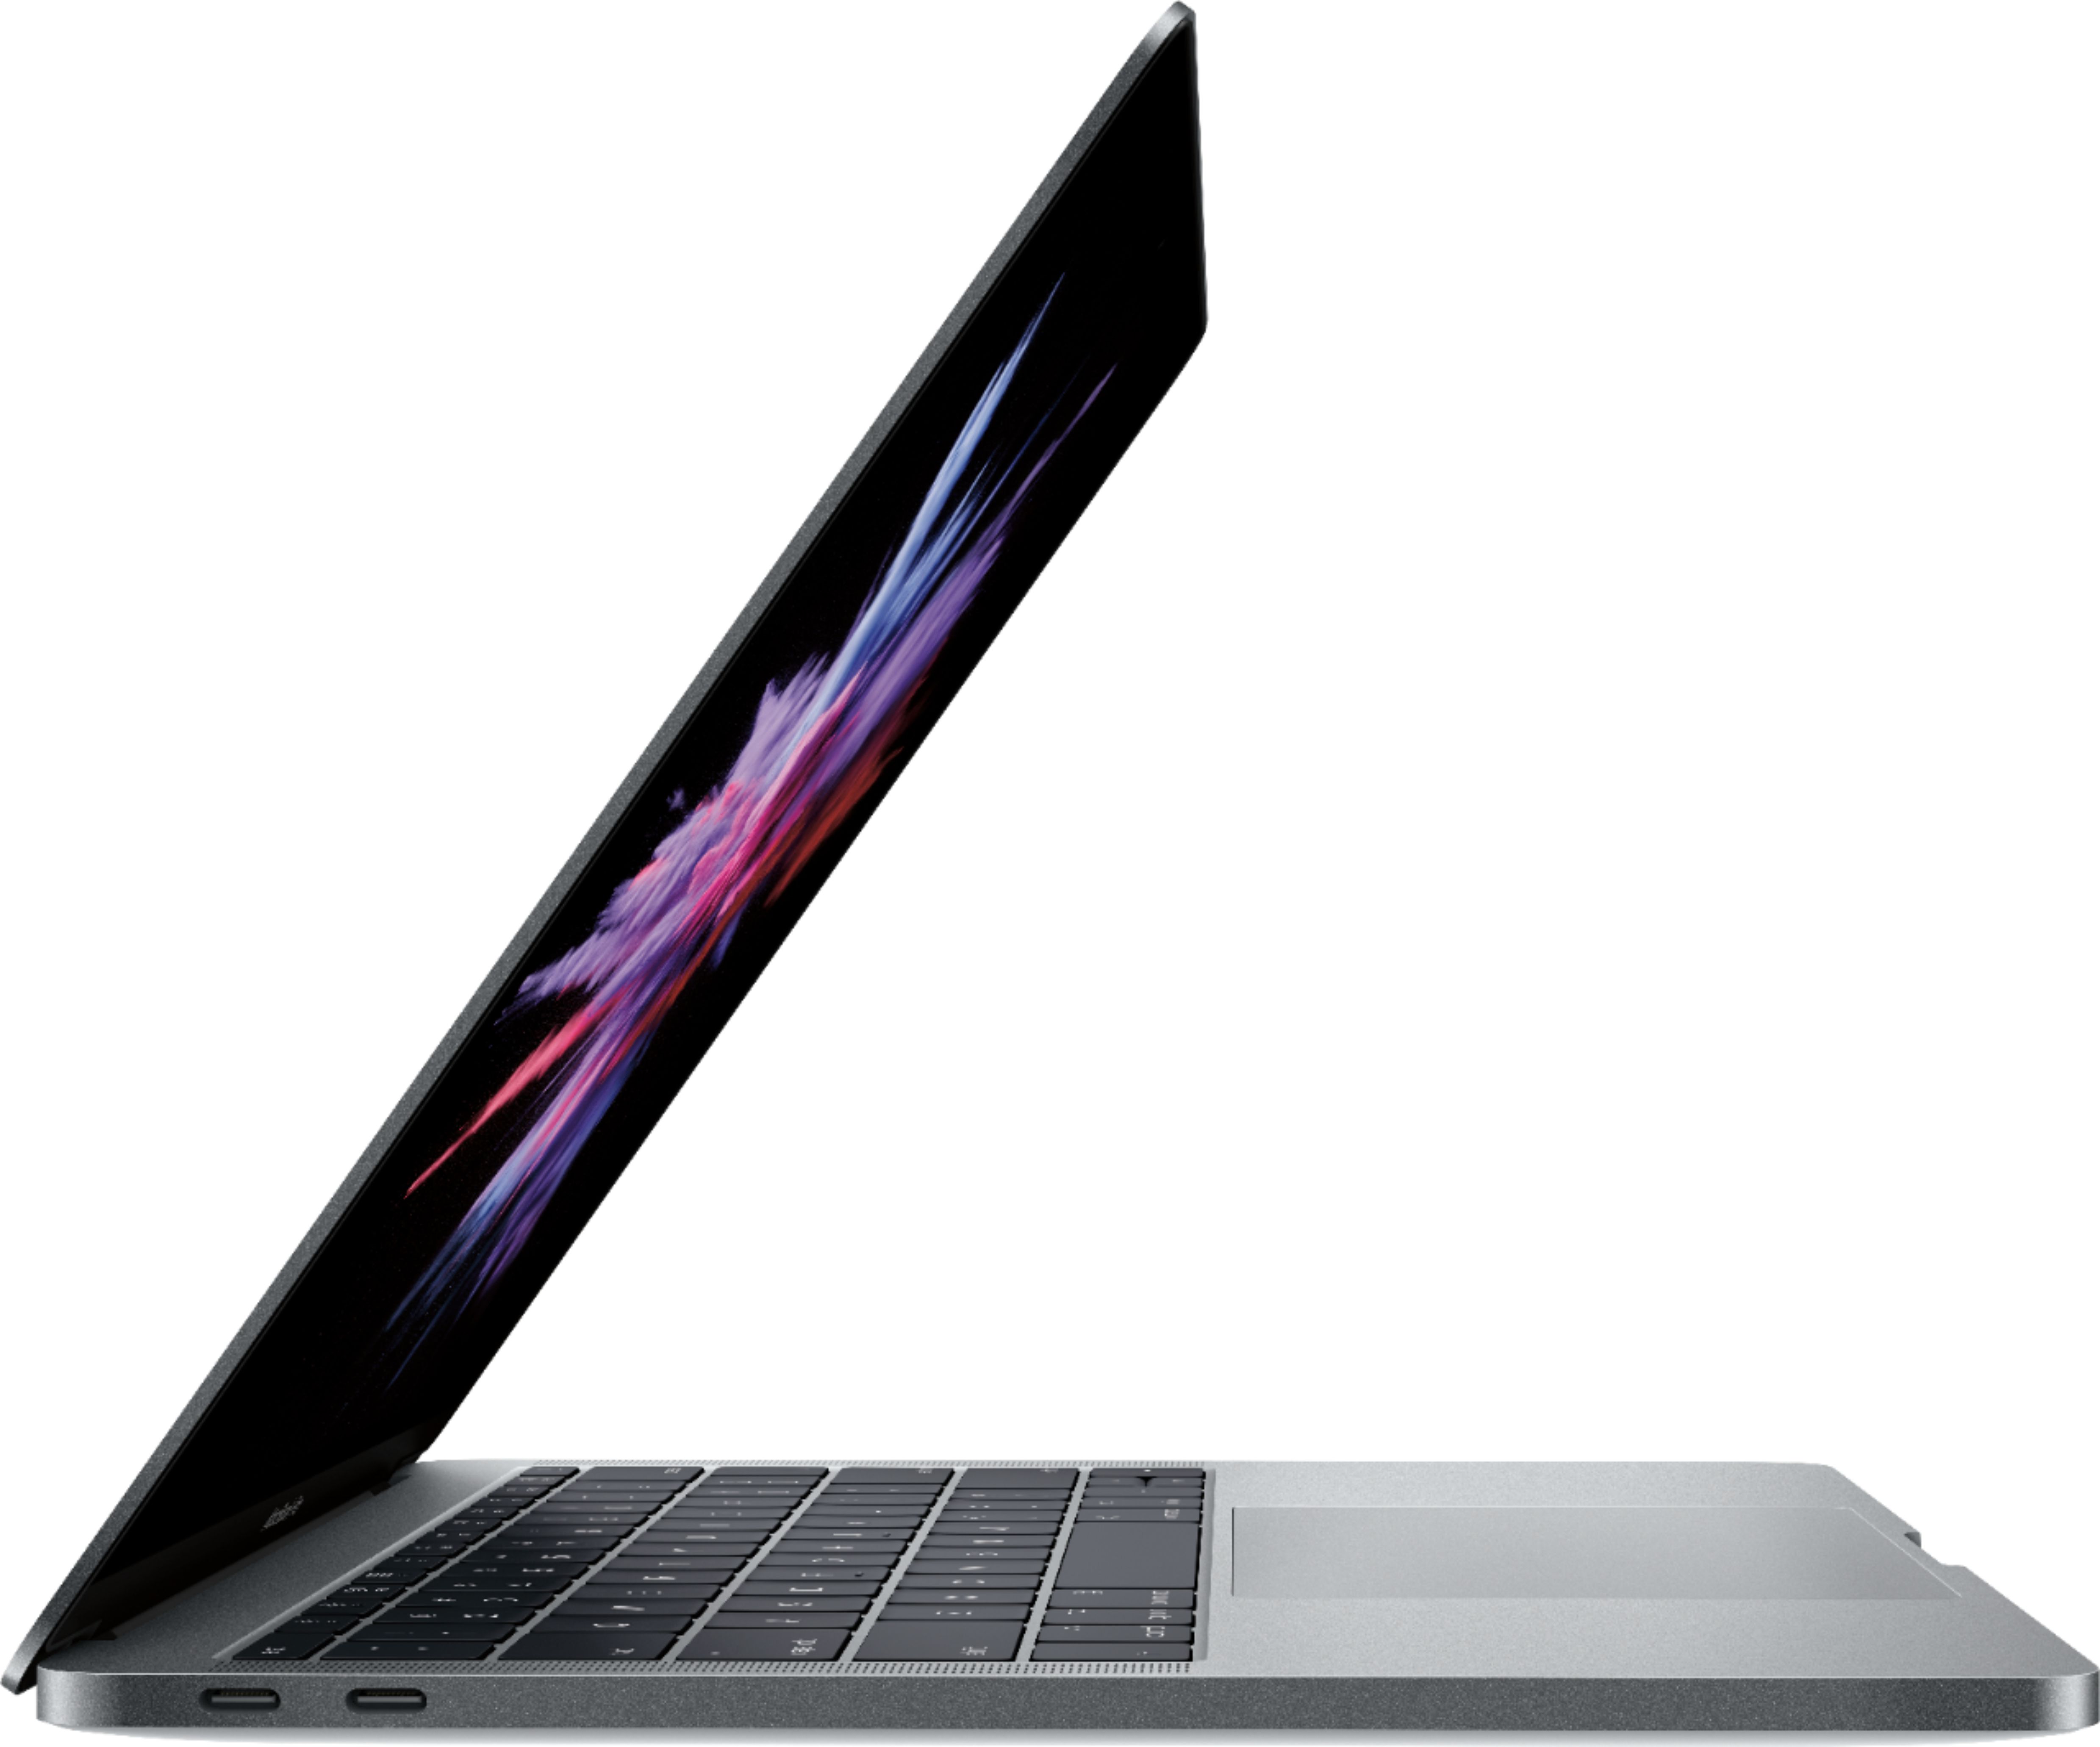 Best Buy: Apple MacBook Pro® 13.3" Display Intel i7 Memory 512GB Solid State Drive Space Z0UK9LL/A